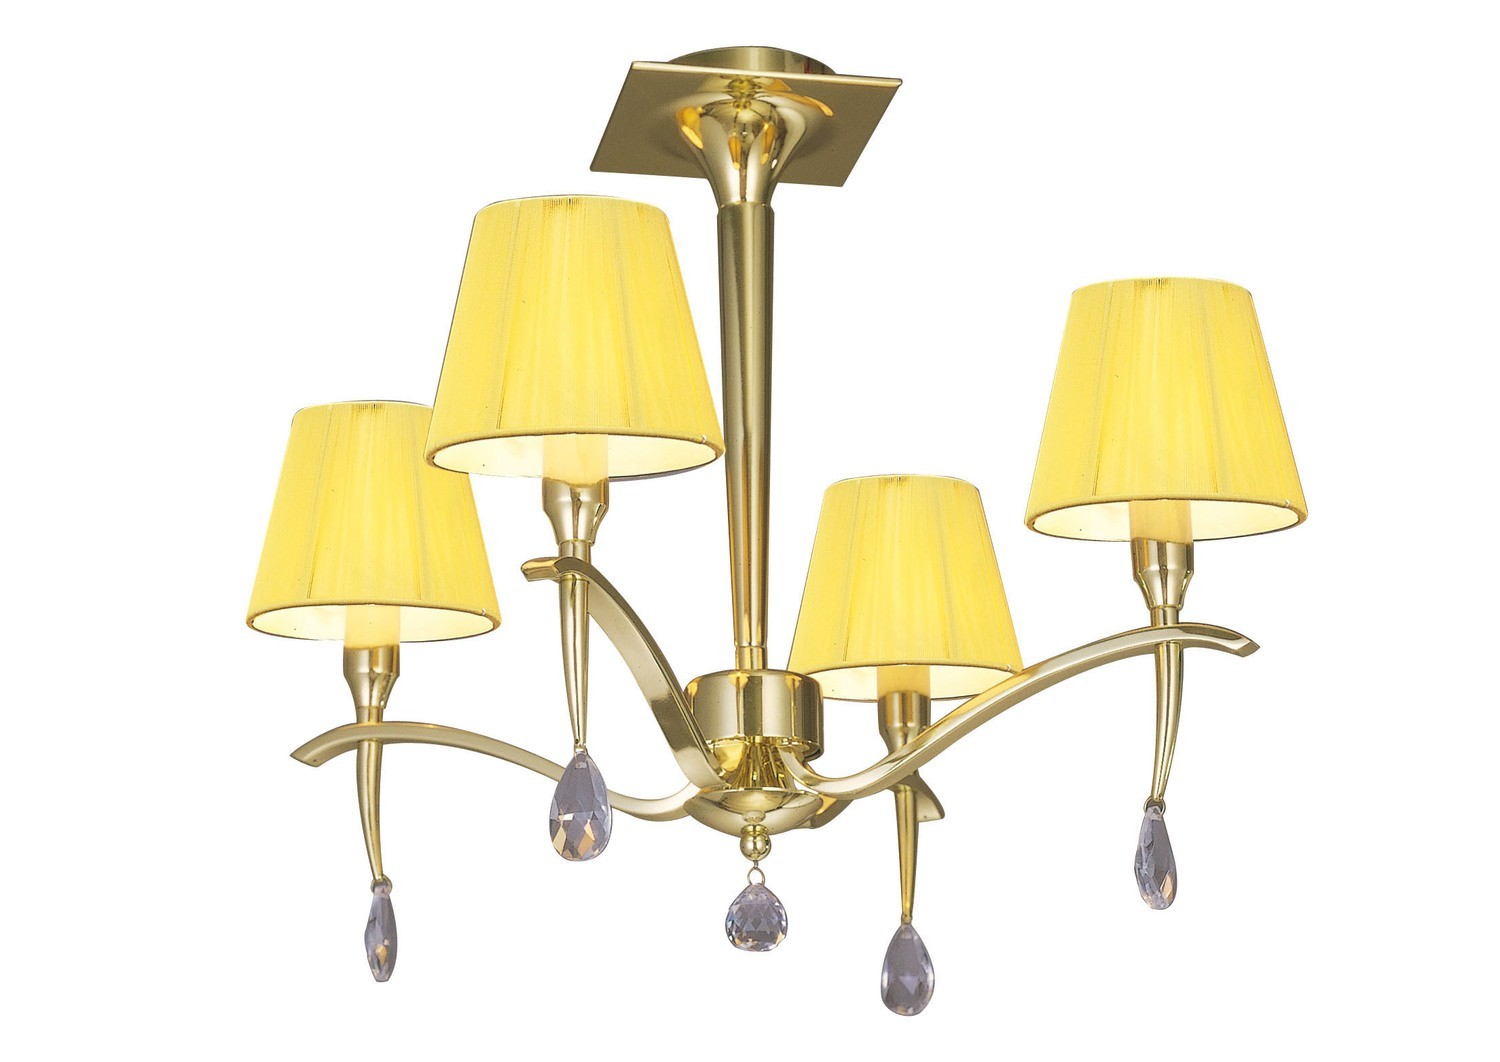 Siena Semi Ceiling Round 4 Light E14, Polished Brass With Amber Cream Shades And Clear Crystal